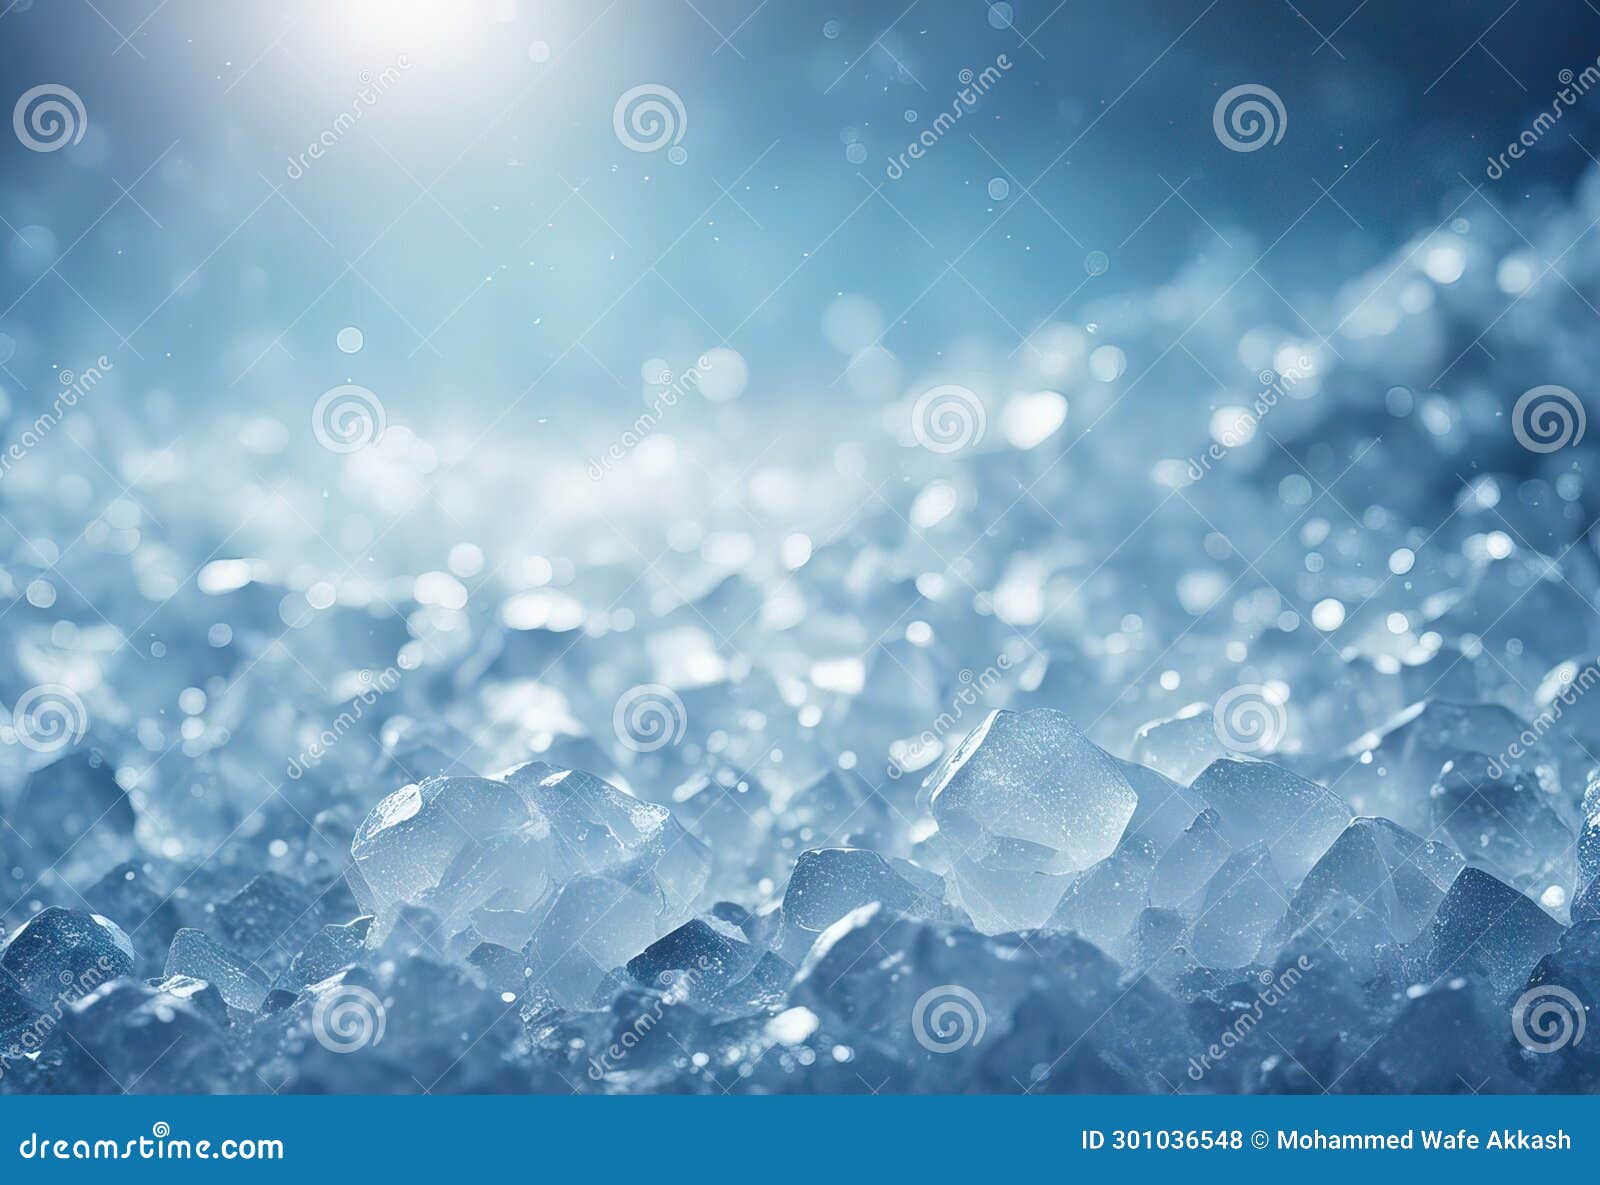  ice background. stock ice, backgrounds, frozen, textured, frost